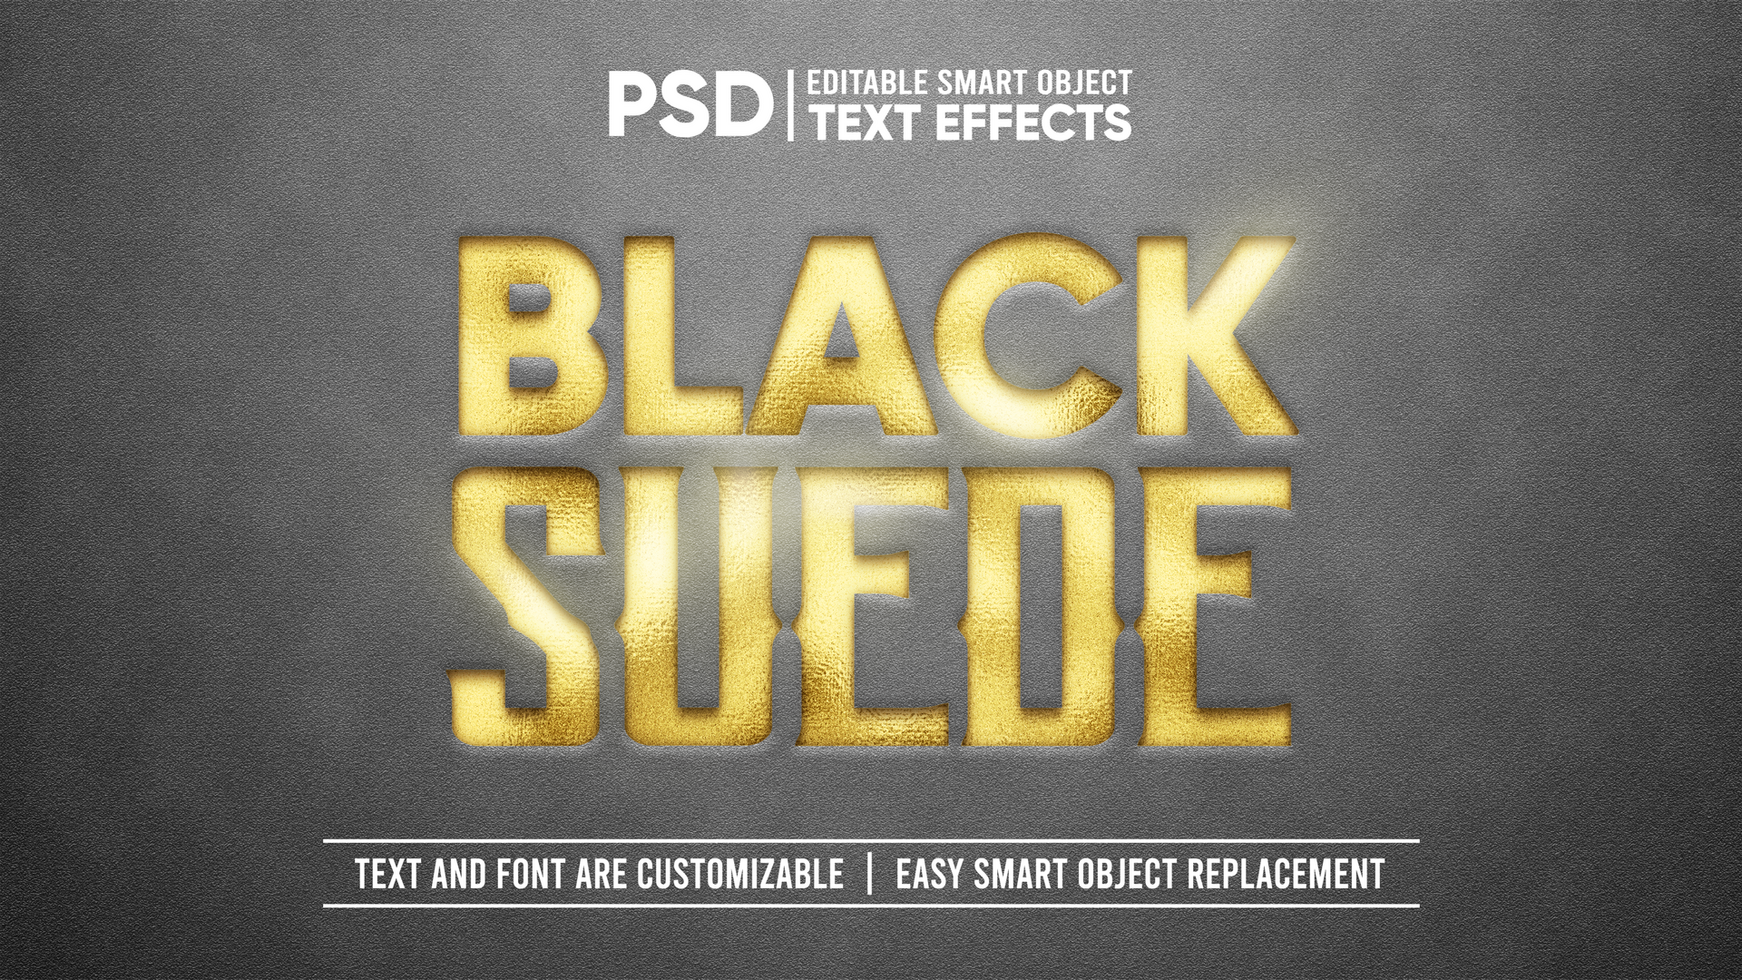 Black Suede Pressed Embossed Gold Stamp Editable Smart Object Text Effect psd